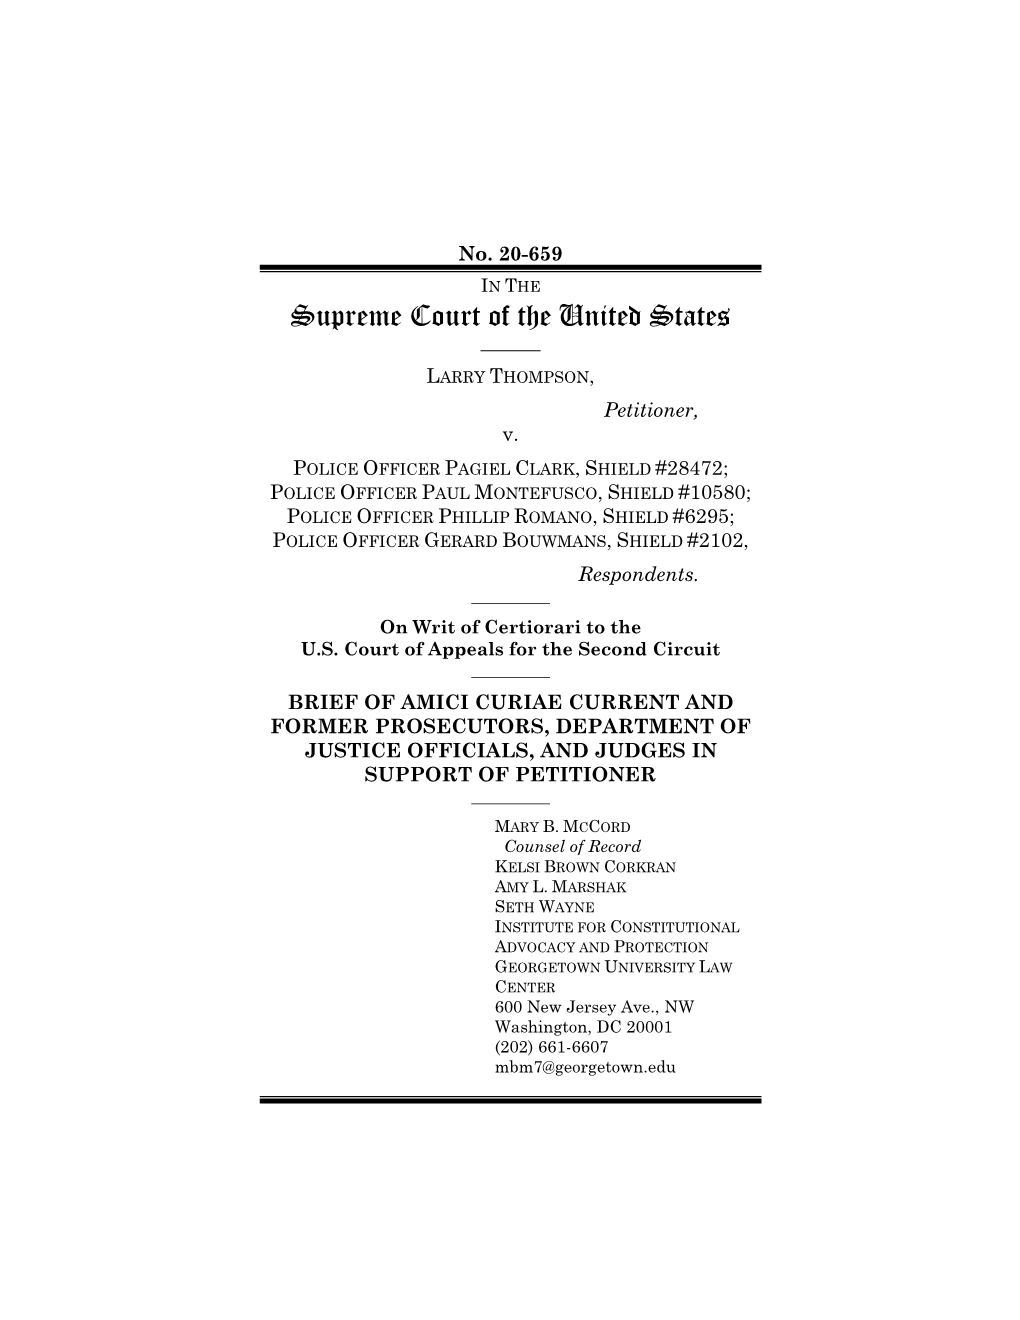 Brief of Amici Curiae Current and Former Prosecutors, Department of Justice Officials, and Judges in Support of Petitioner